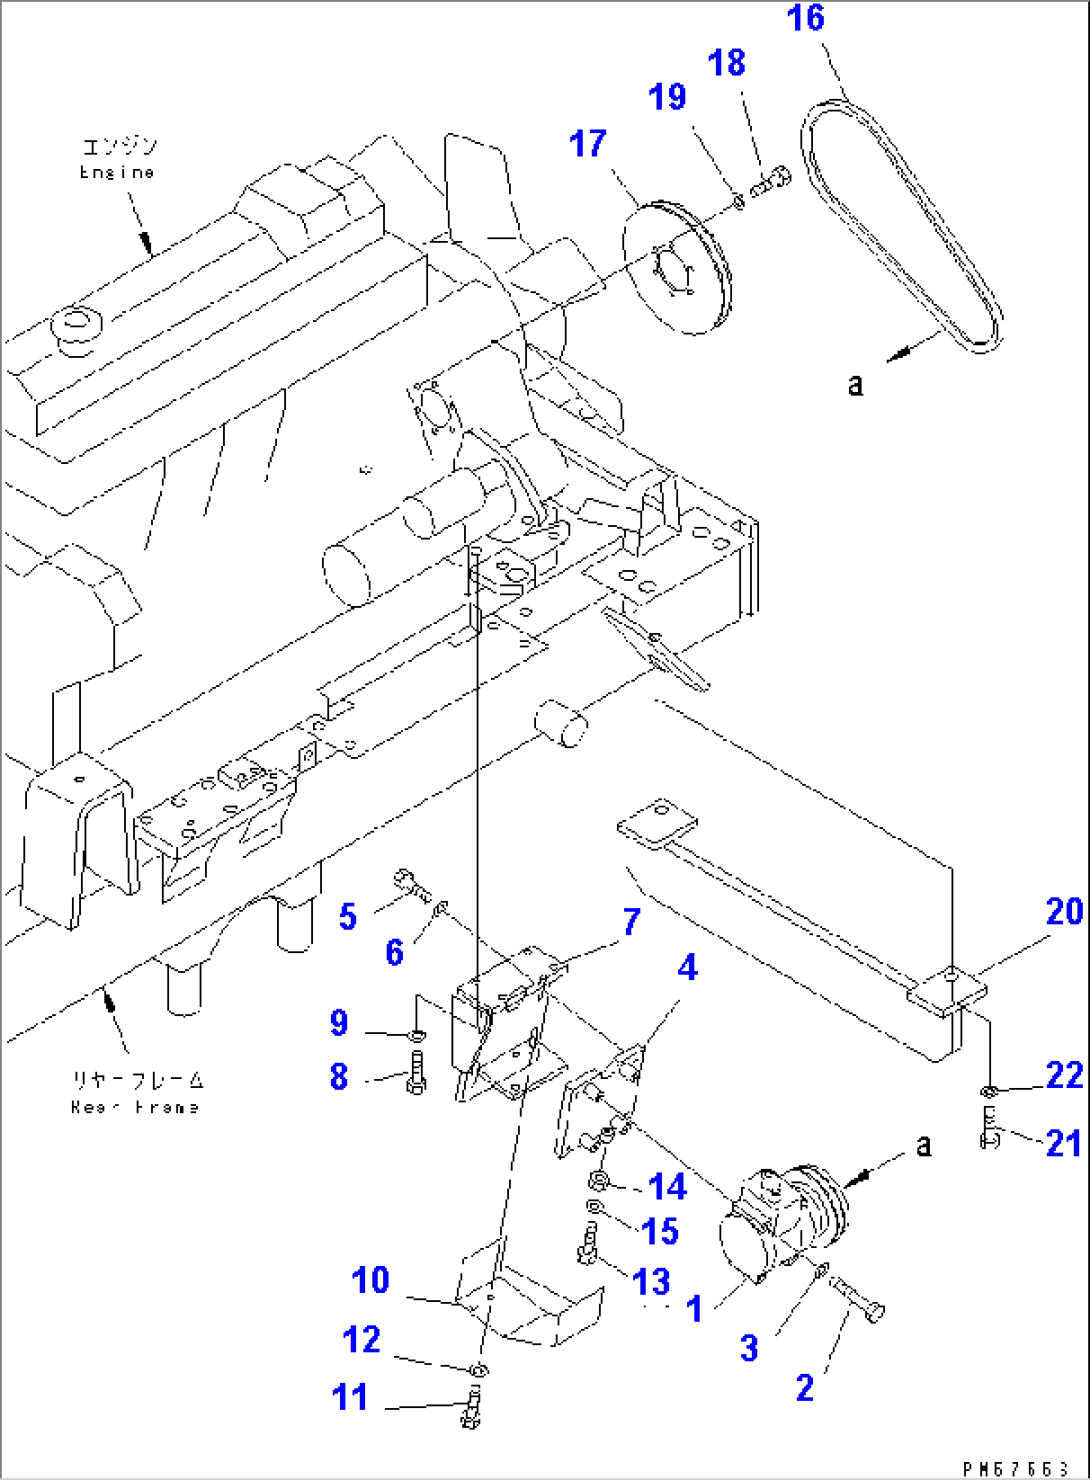 AIR CONDITIONER (3/10) (COMPRESSOR AND RELATED PARTS)